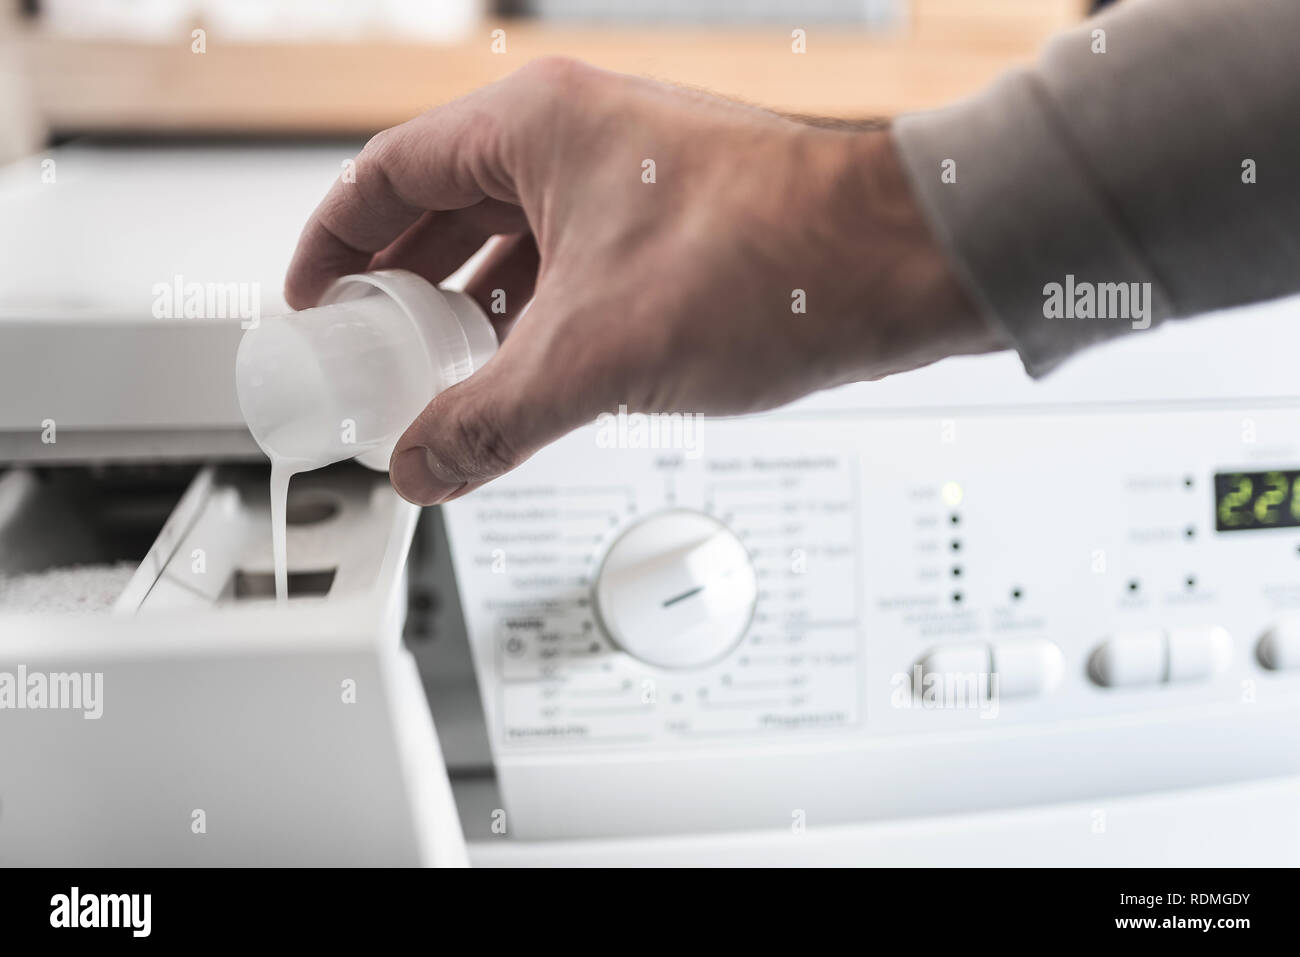 person using dosing aid to fill fabric softener into washing machine Stock Photo